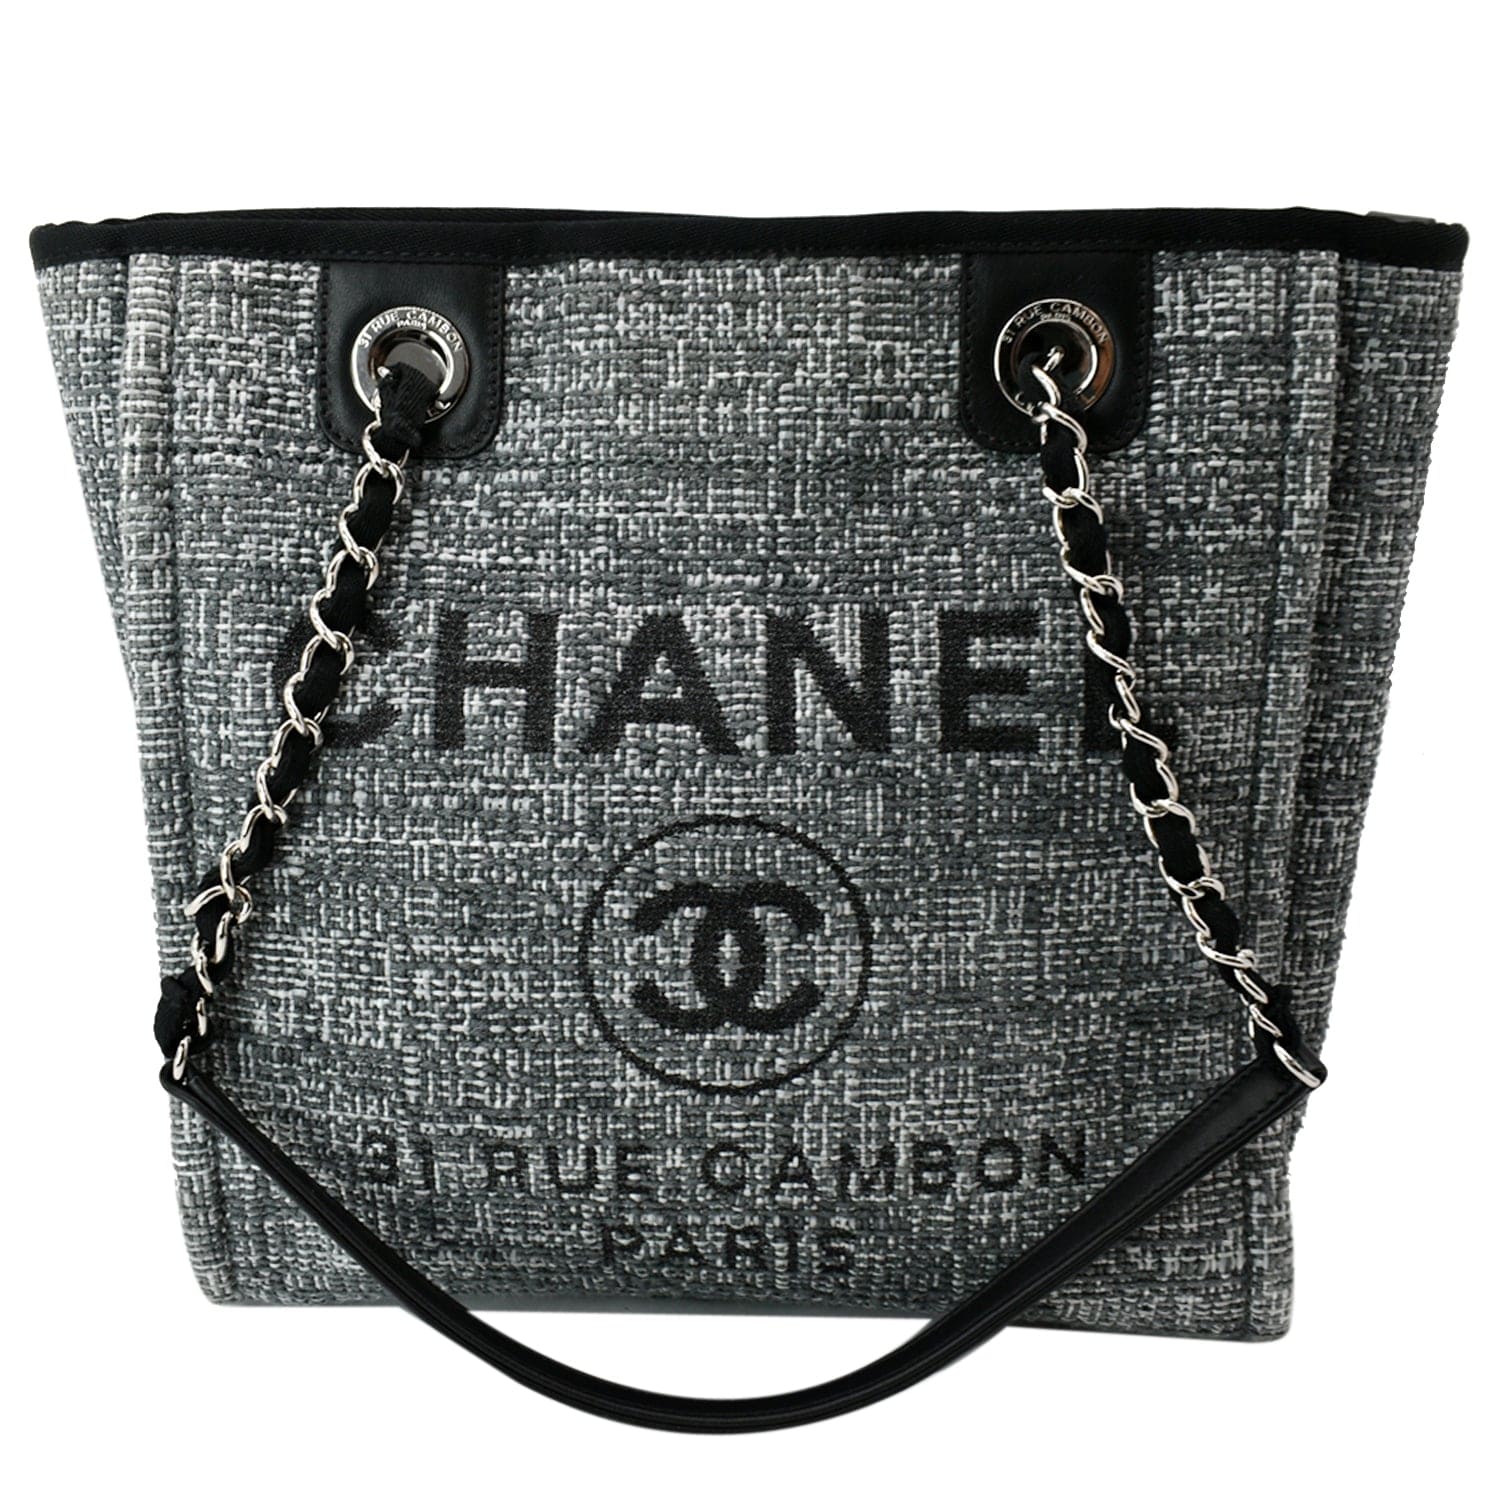 CHANEL Deauville Small Lurex Boucle Canvas Tote Bag Grey - Клатч